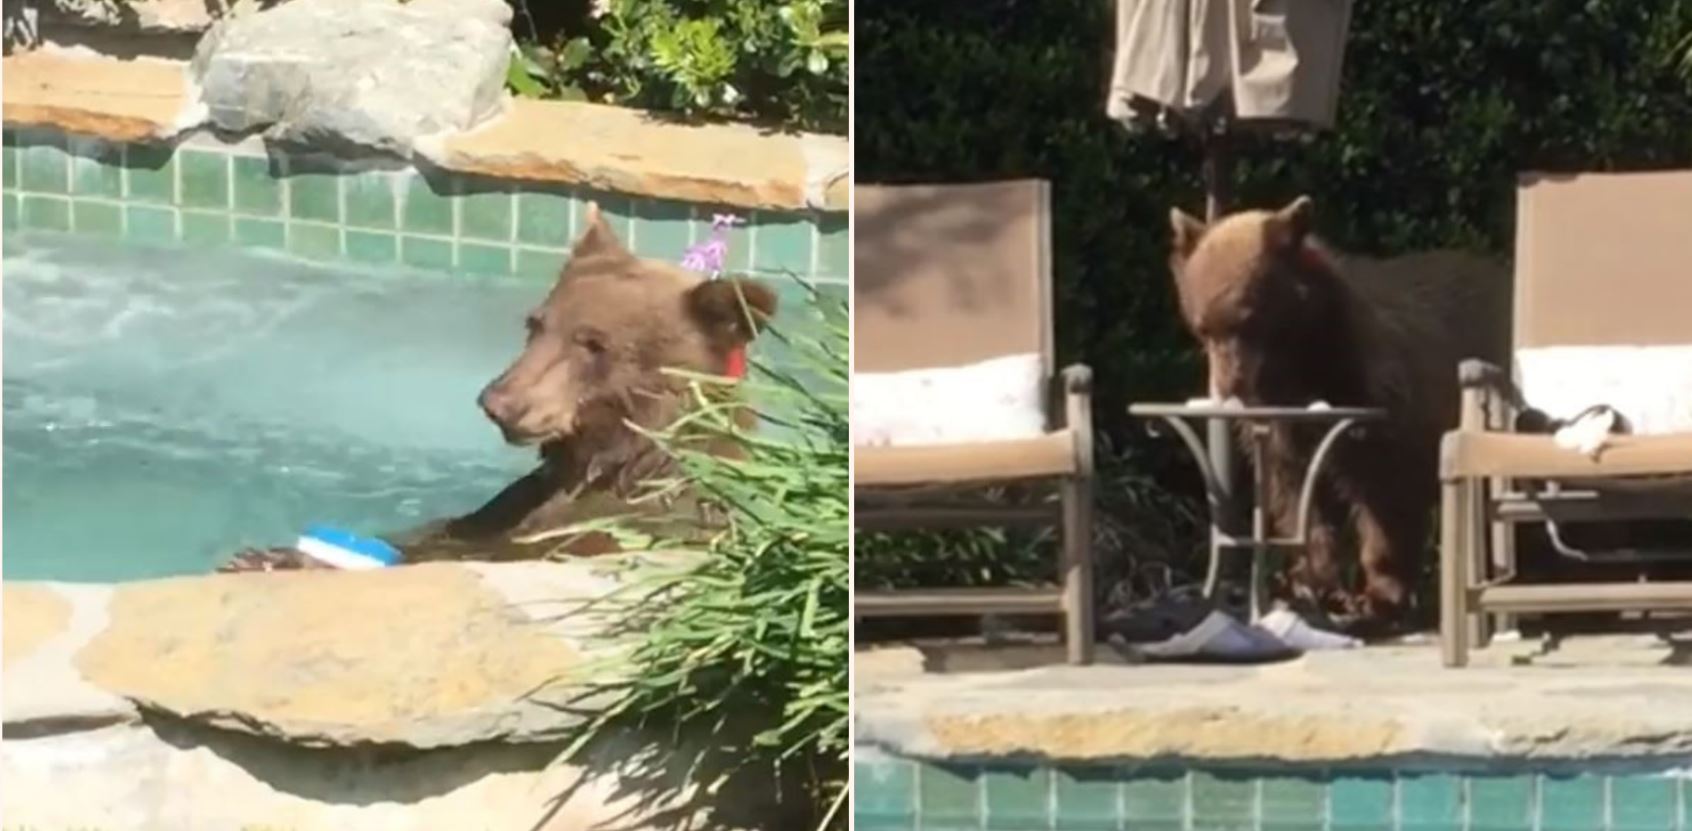 Awesome bear goes for a swim in blokes backyard, drinks margeritas, then takes a nap